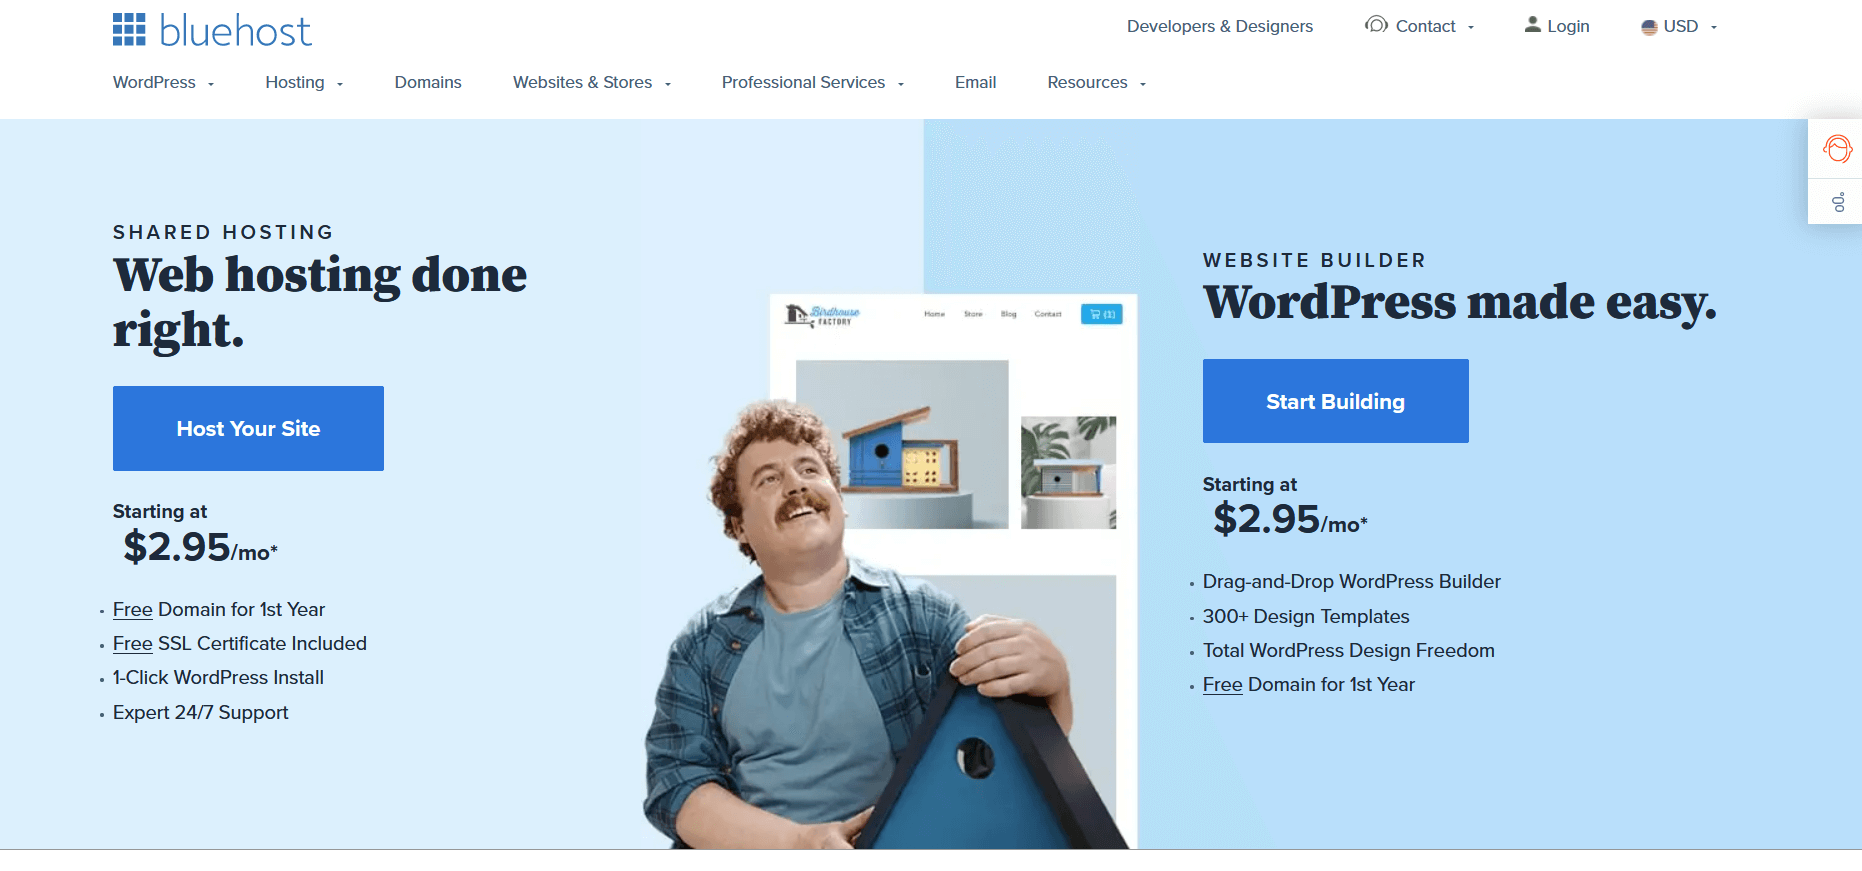 bluehost-homepage